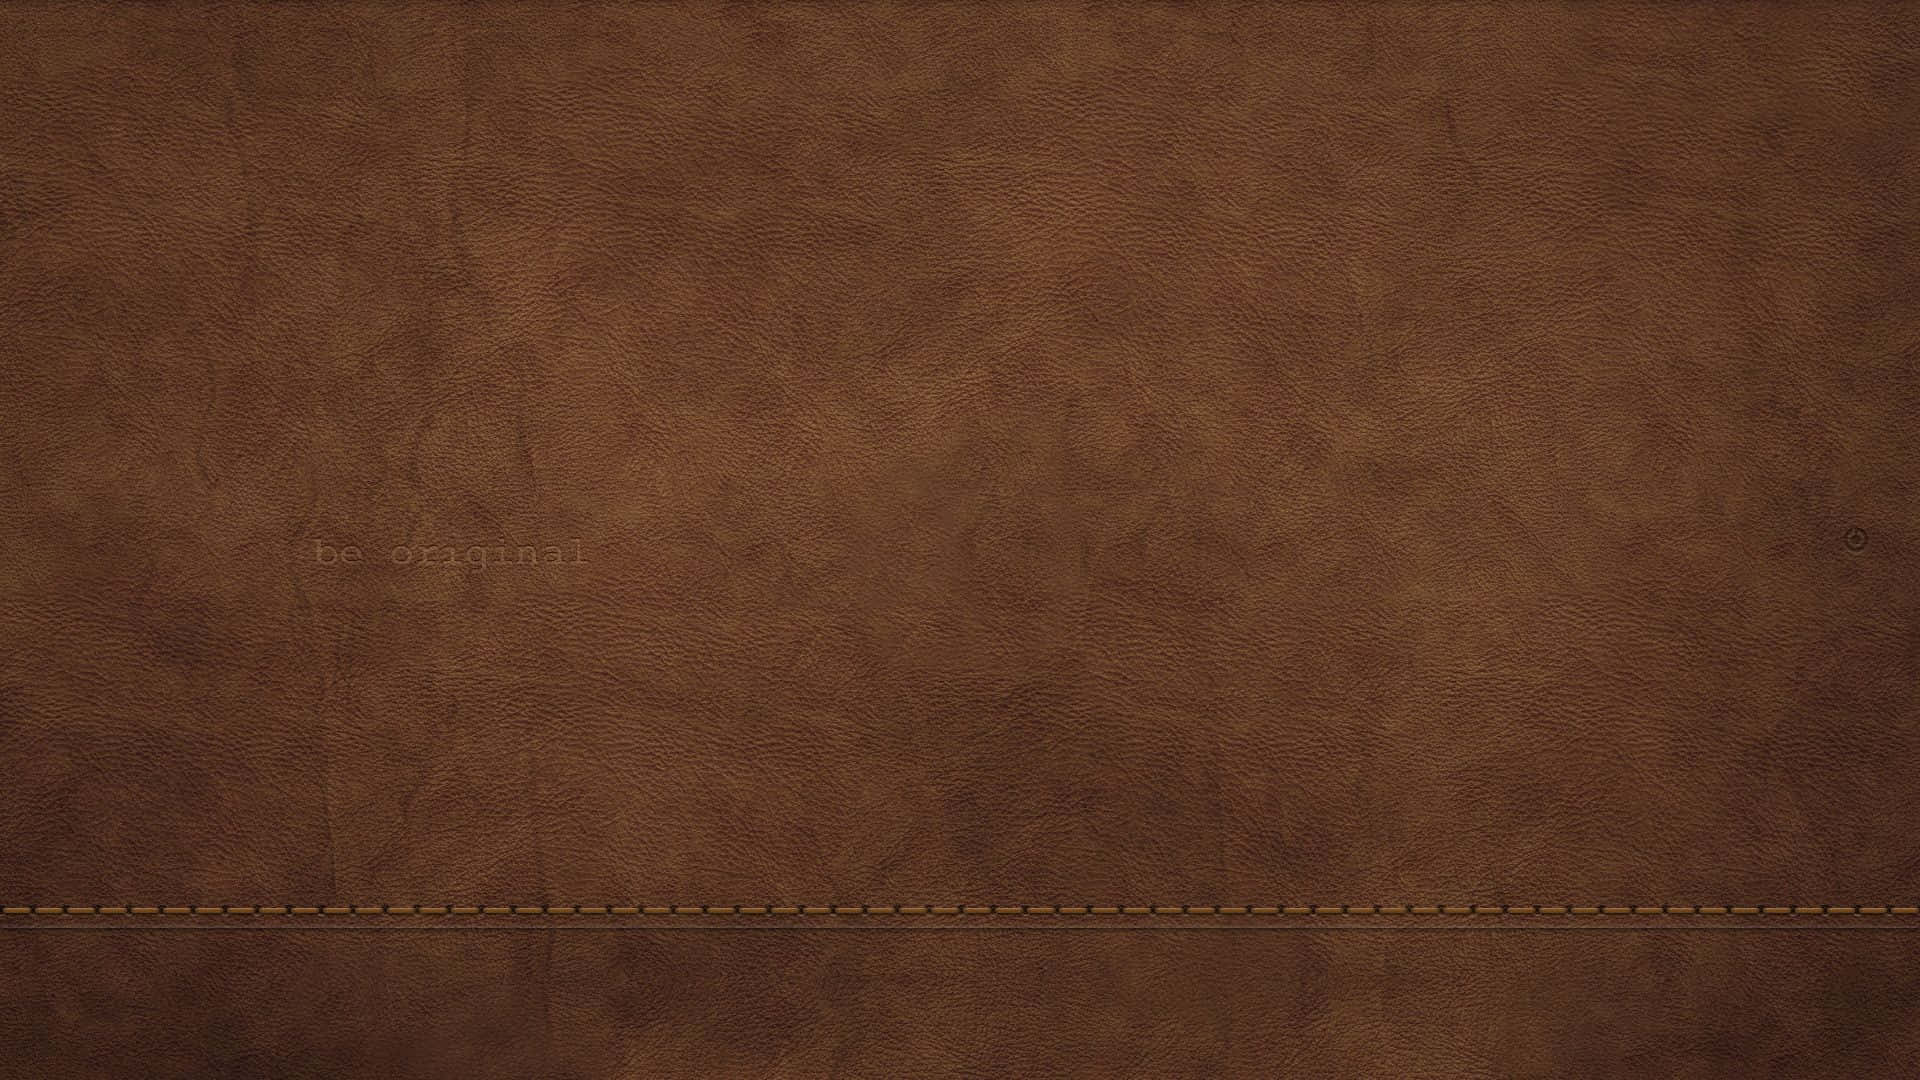 Luxurious Brown Leather Texture Wallpaper